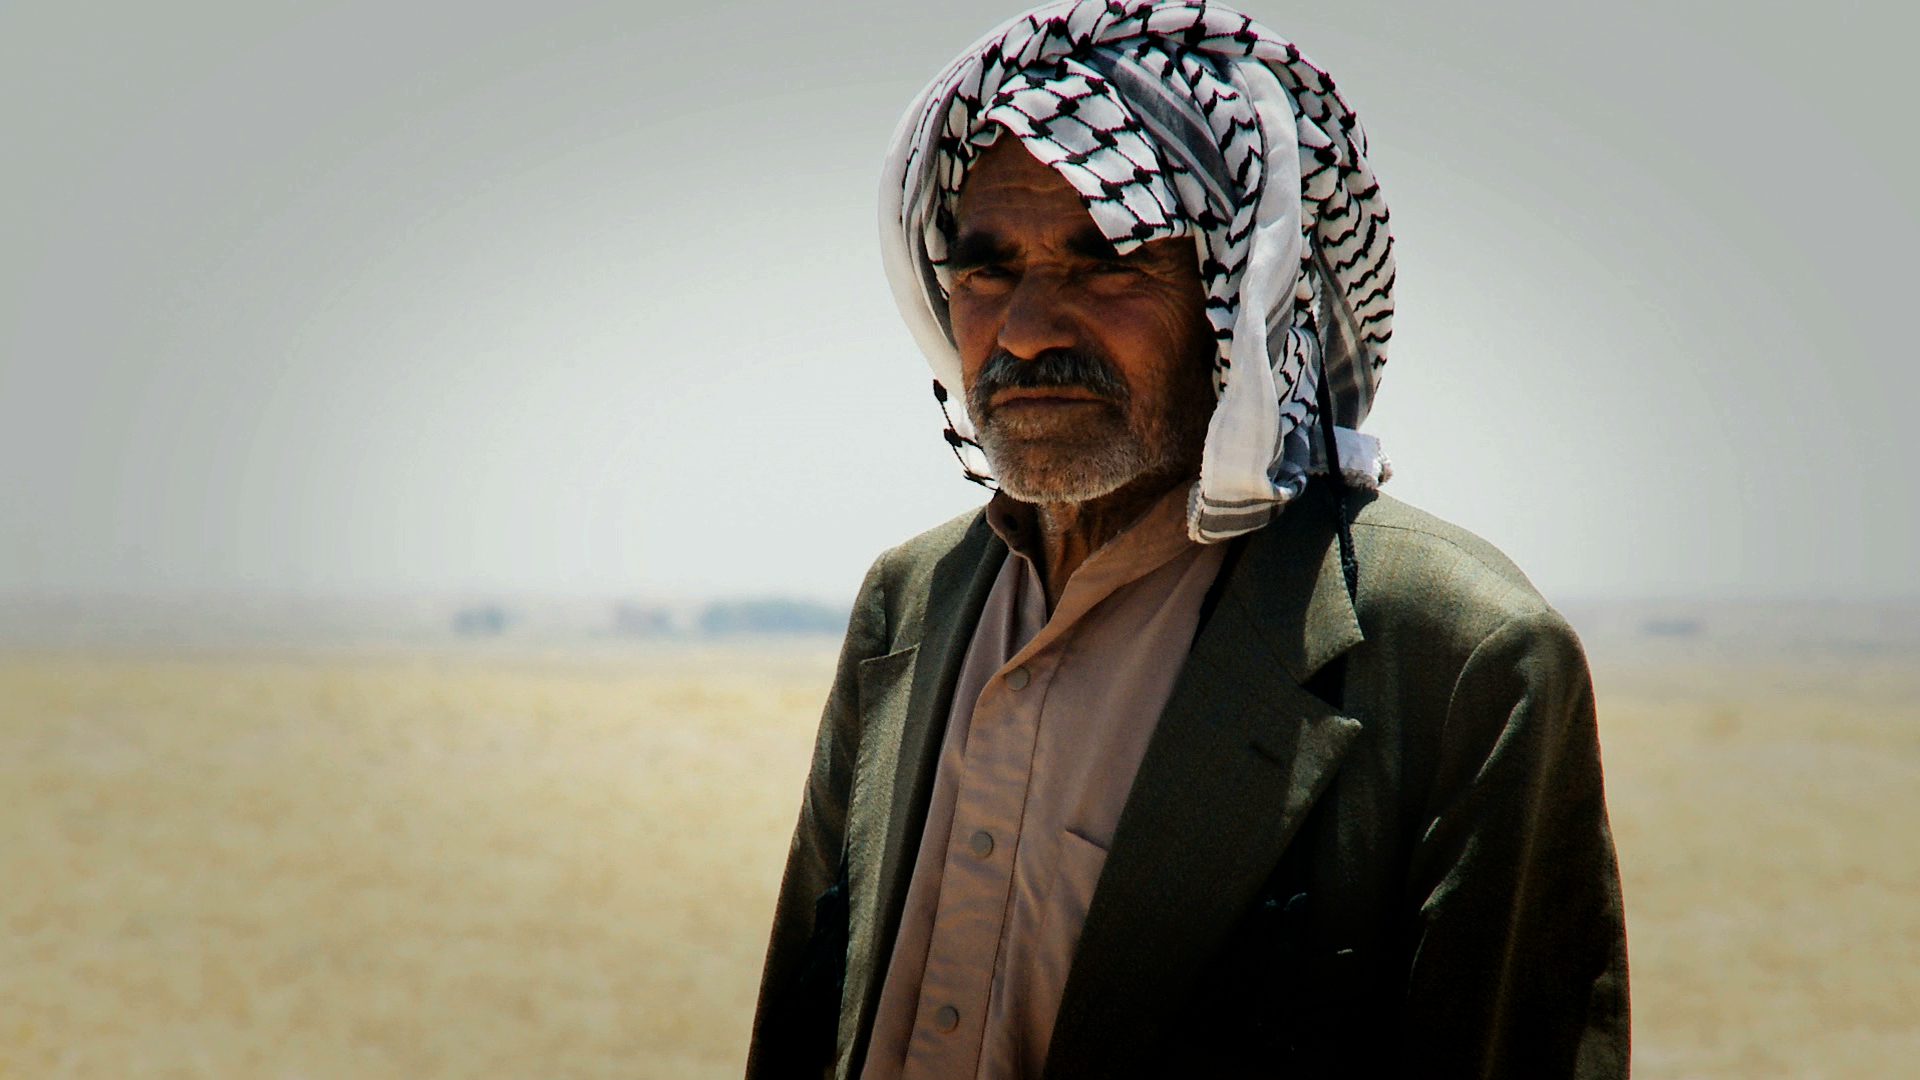 Arab farmer SHAHAB AHMED AWAD lived in Shernaw village in 1963 and saw his Kurdish neighbours expelled from the Kirkuk region by the Arab National Guard. After the collapse of the 1970 Autonomy Agreement between the Kurdish leadership and the Iraqi government, he explains how he, like other Arabs living peacefully amongst Kurds, was himself removed from his home in 1975.